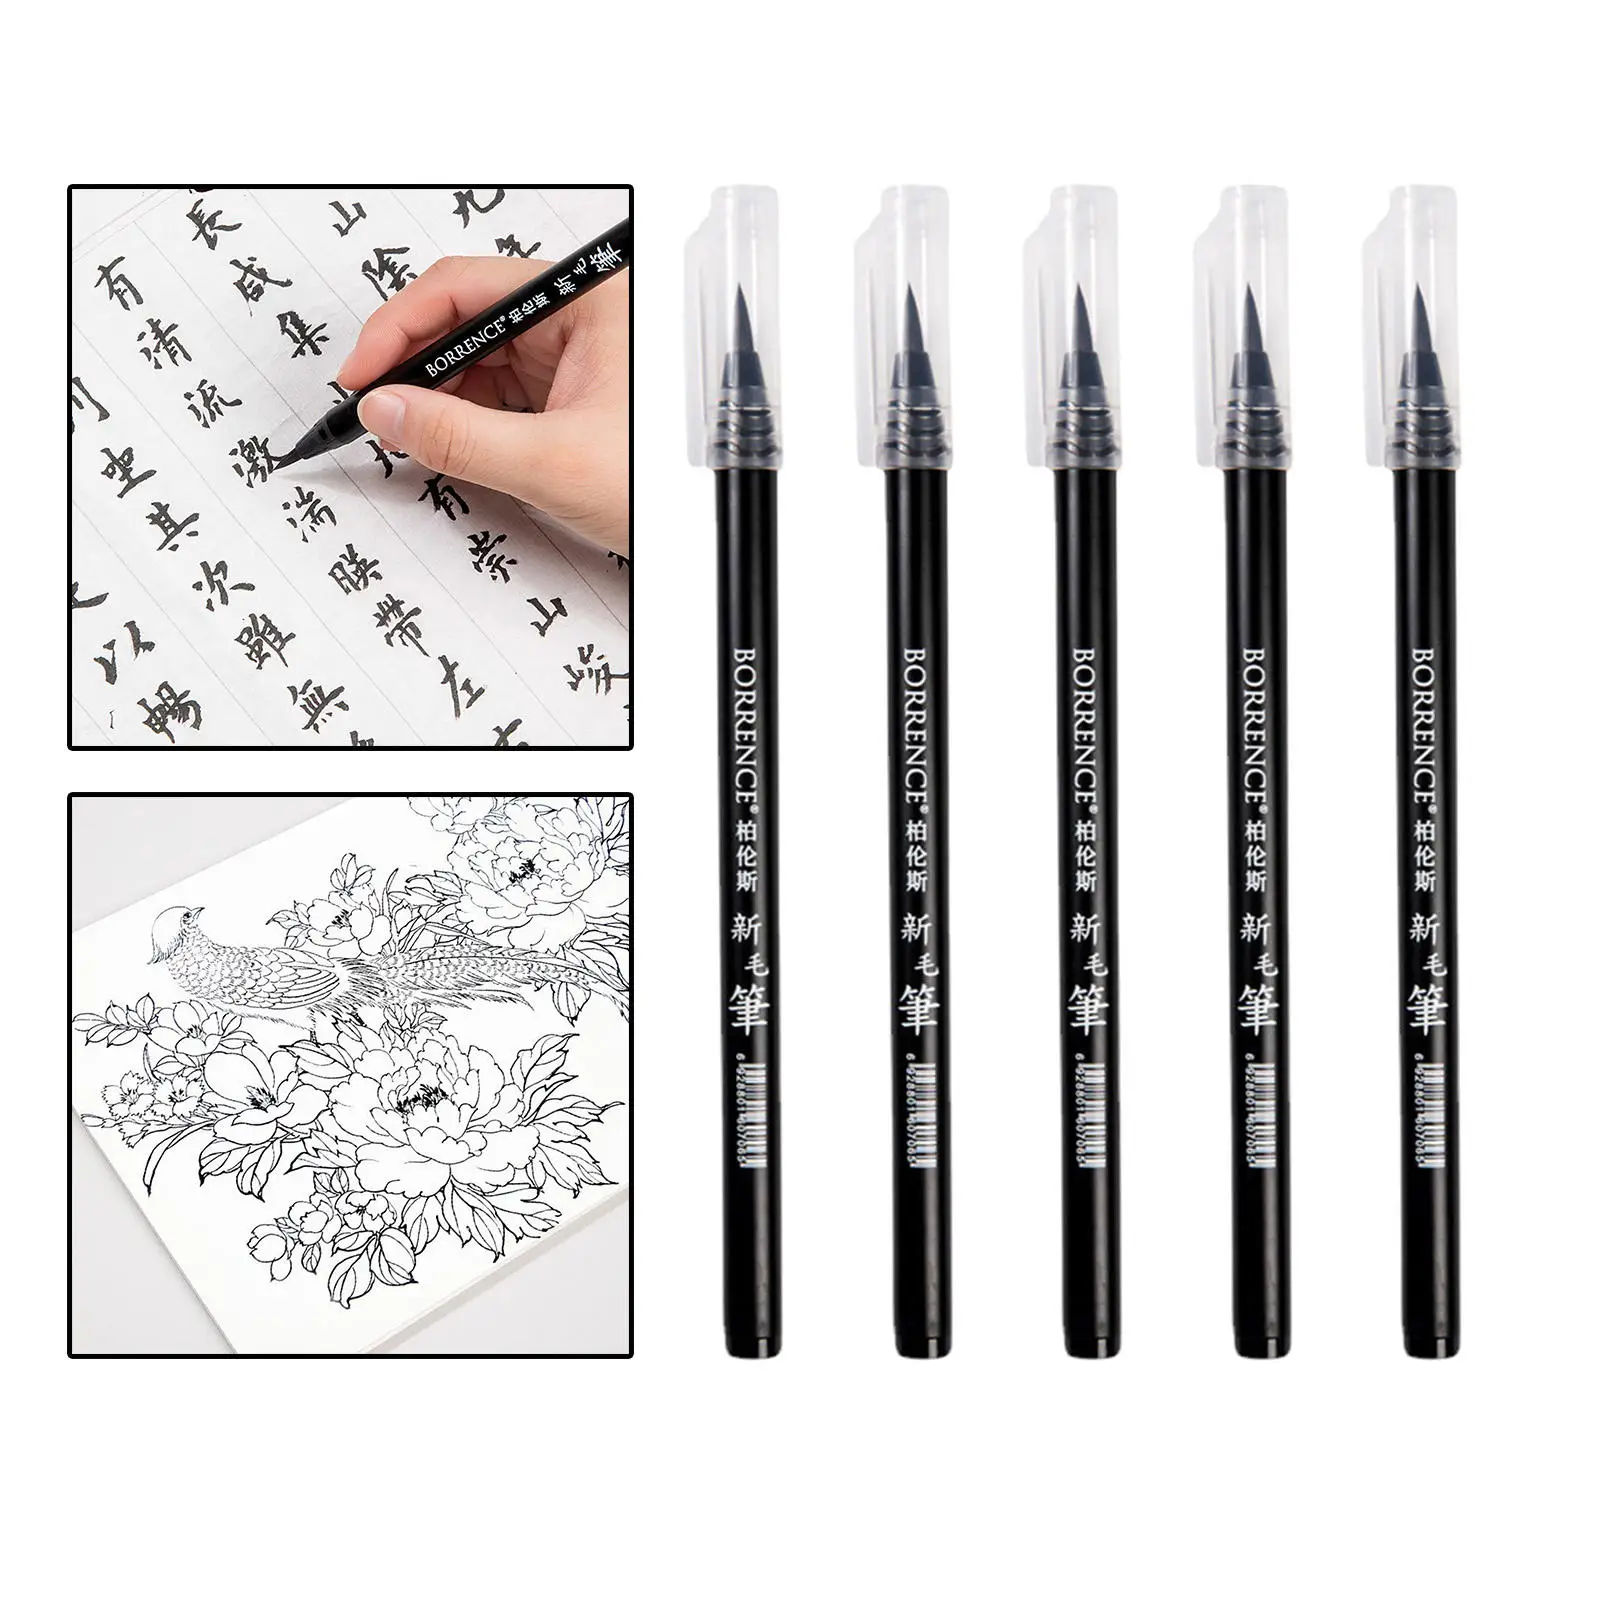 5Pcs Soft Brush Pen Black Waterproof Compact Plastic Shaft Synthetic Art Drawing Writing Lettering for Artist Painting Brush Set